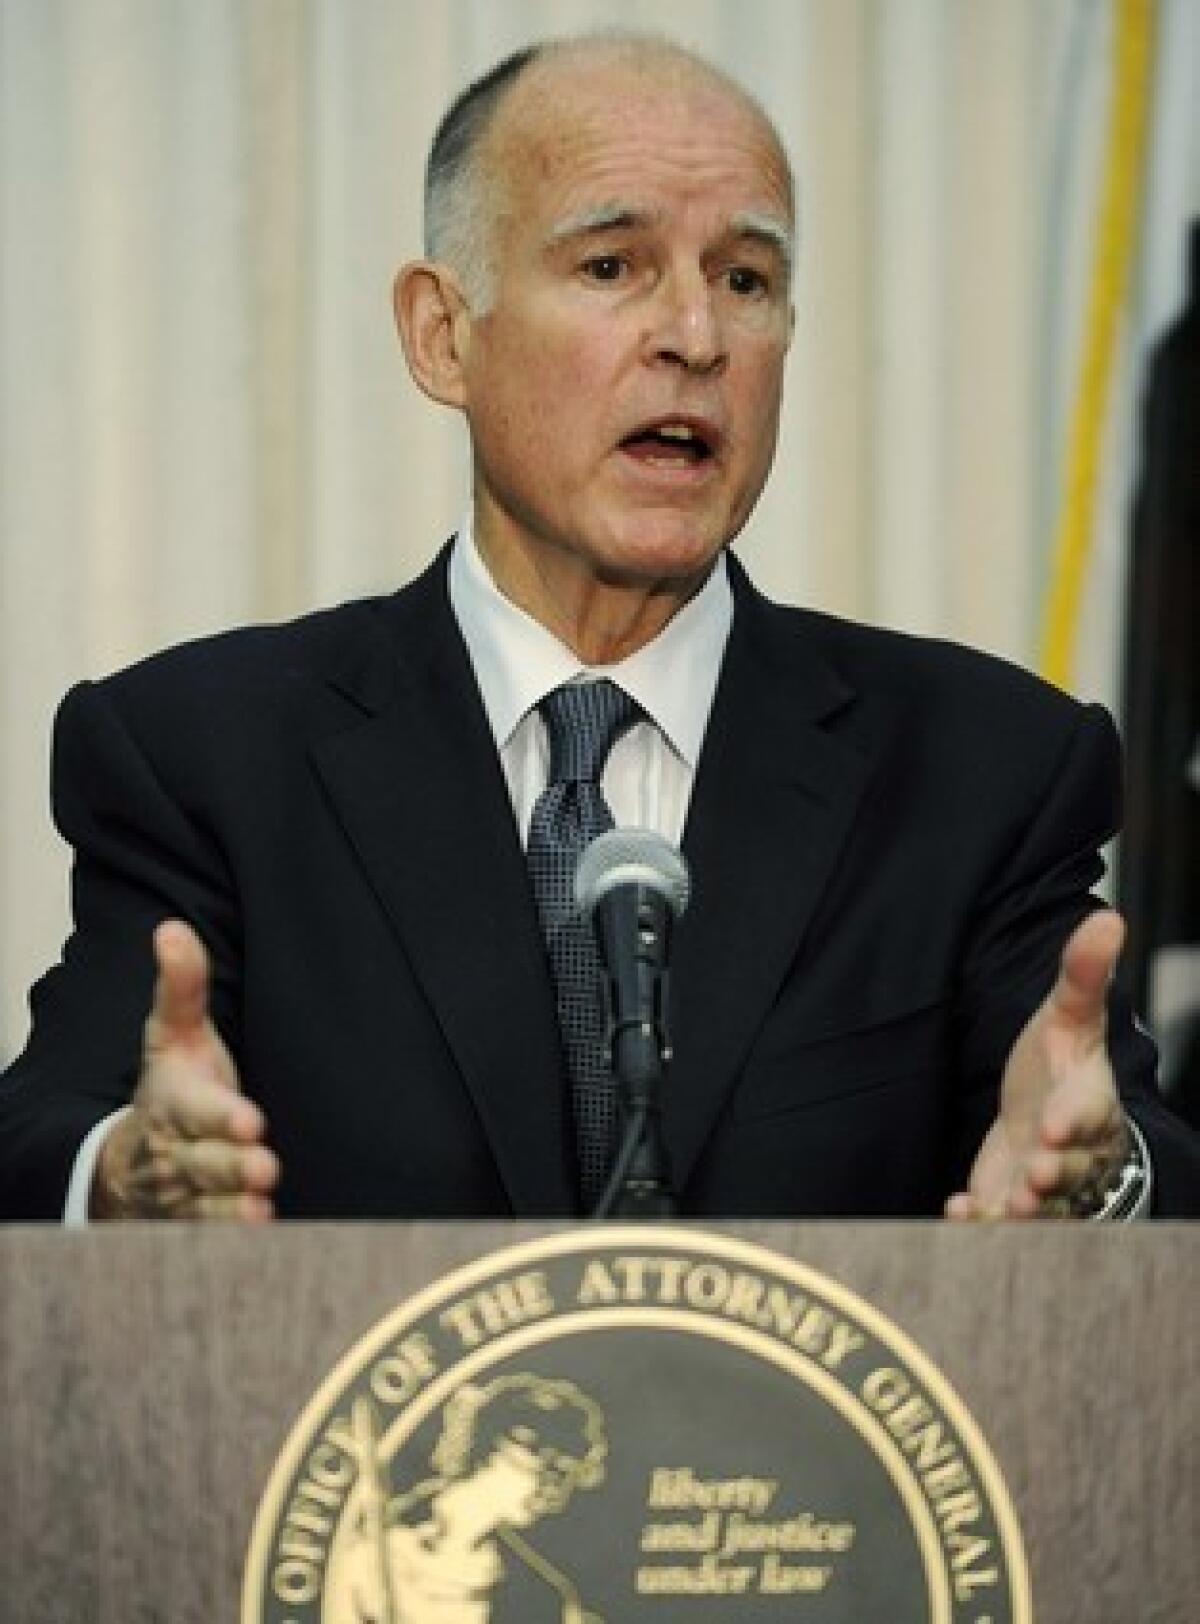 The state attorney general, 71, has a long history in California government. Brown has yet to formally announce his intentions regarding the governor's race.